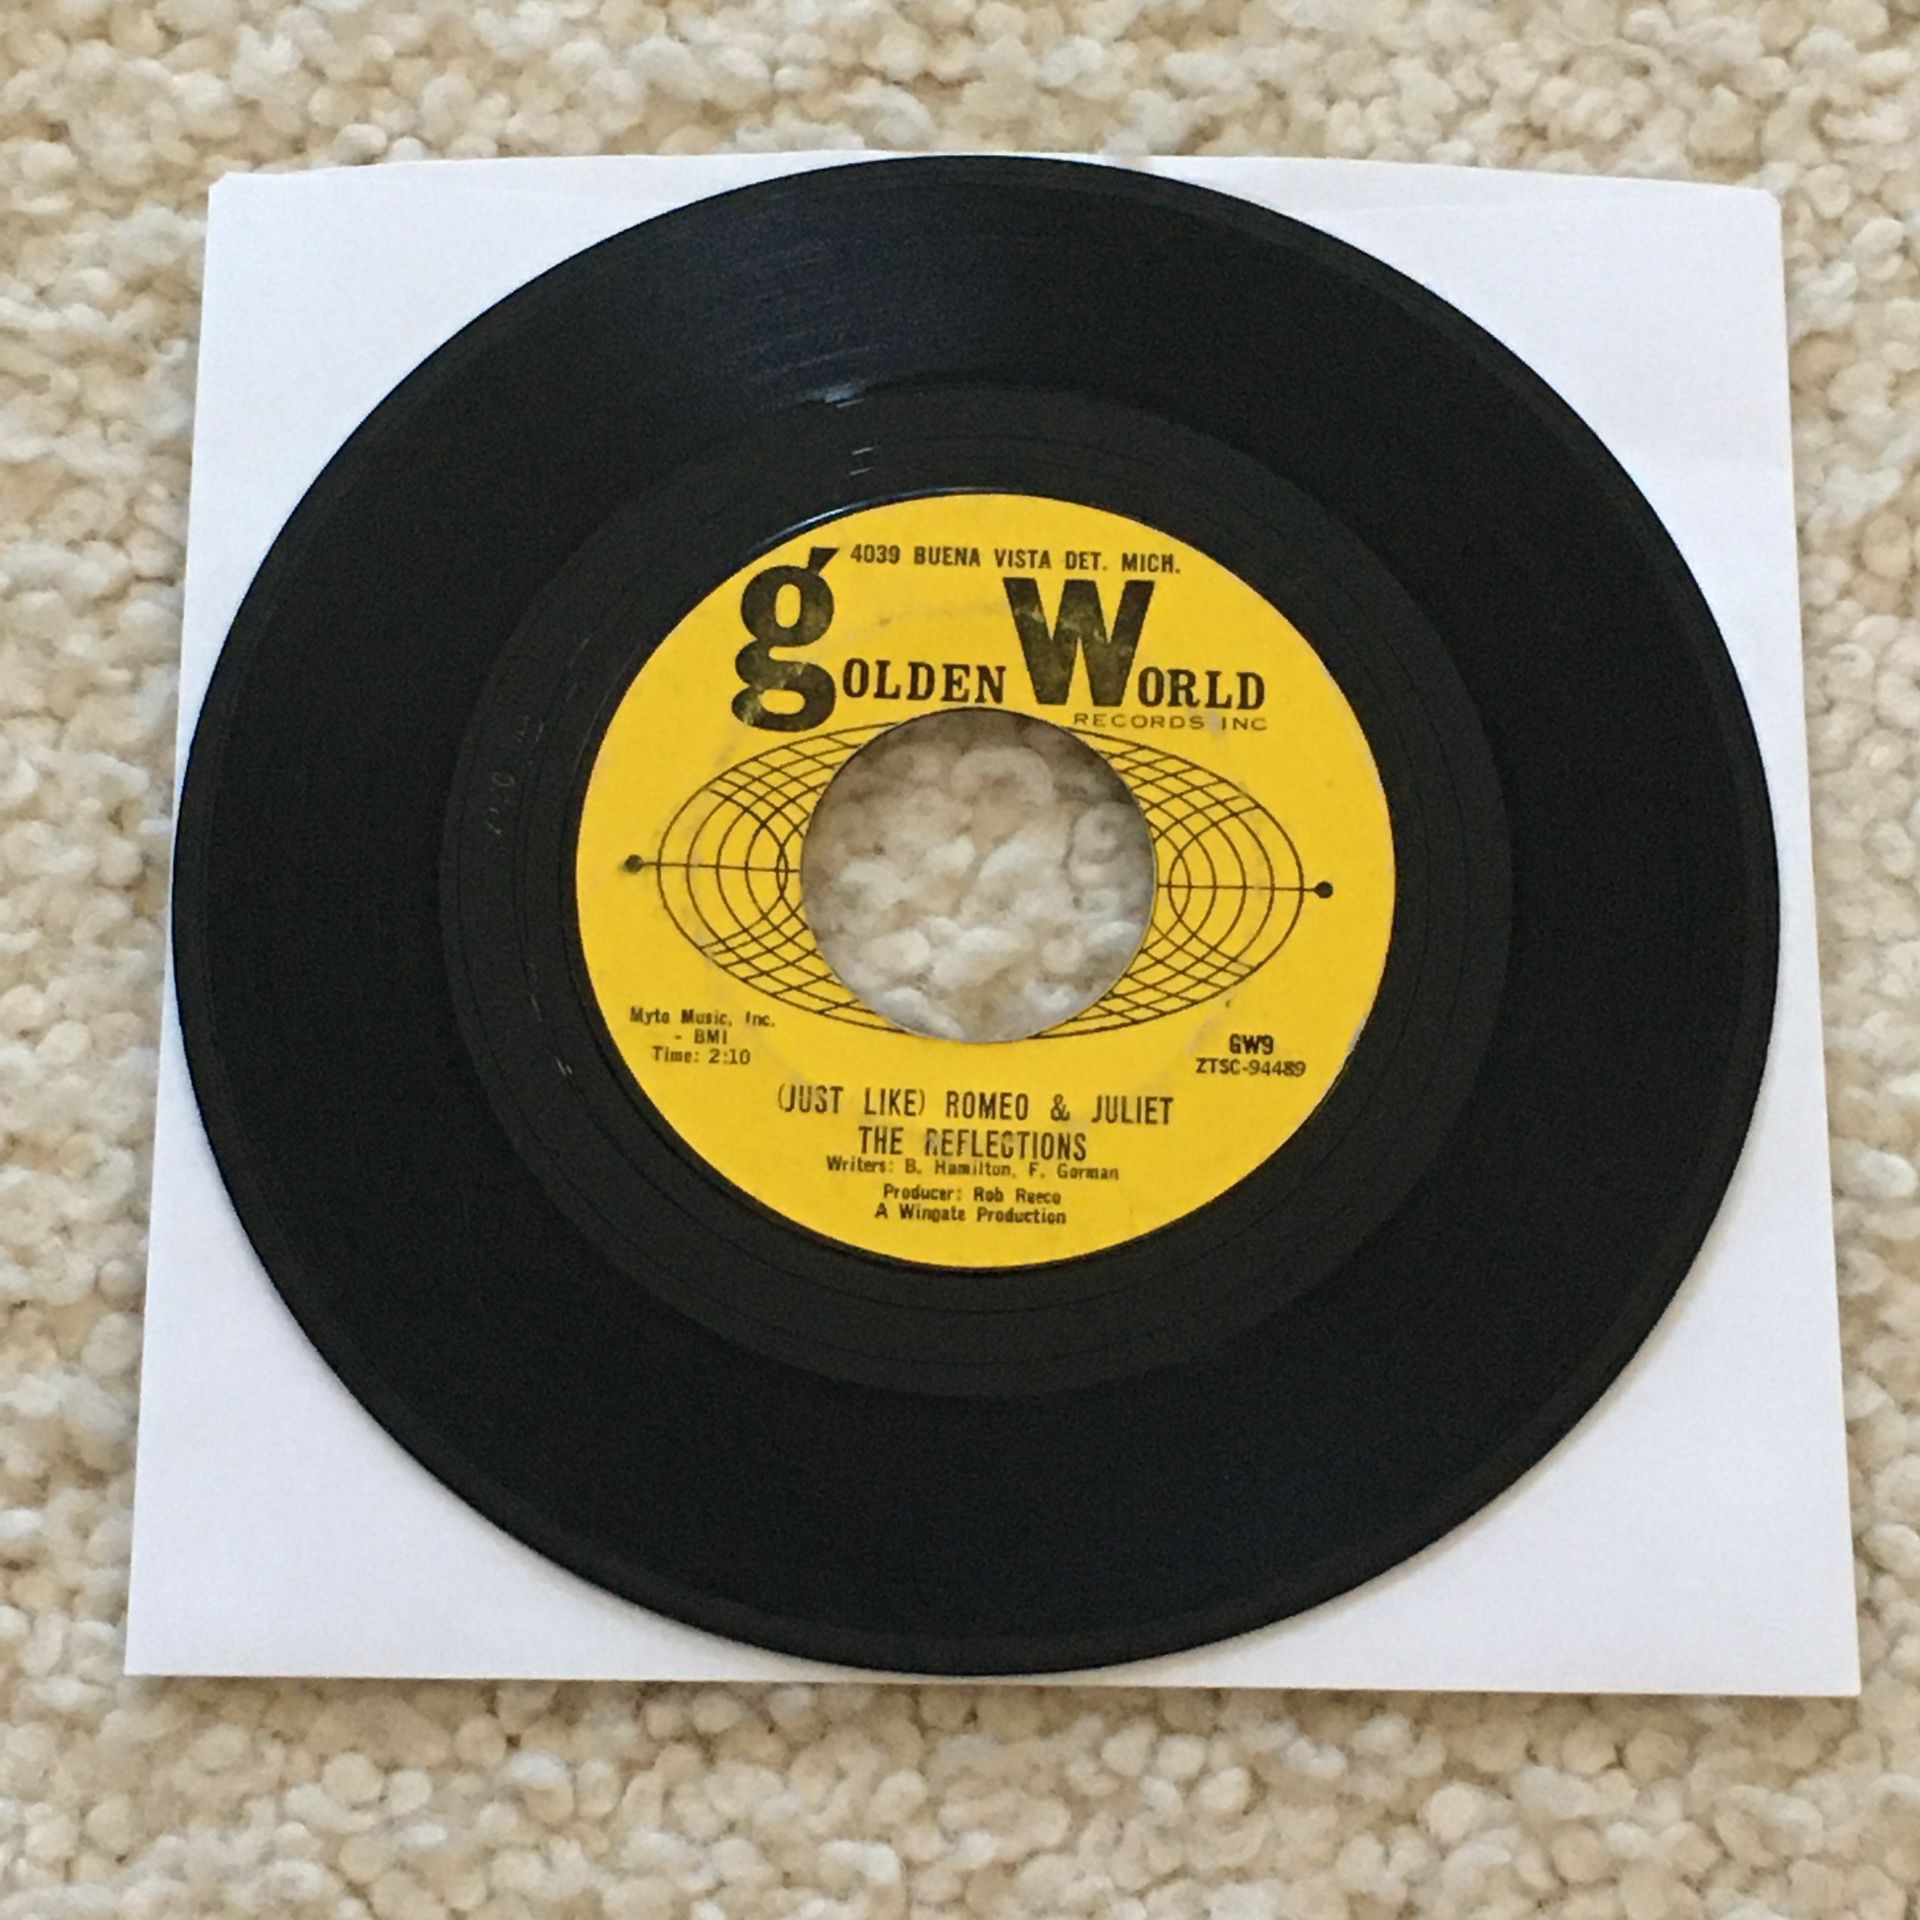 The Reflections “(Just Like) Romeo & Juliet” vinyl 7” single 1964 Golden World Records Original 1st Press Mono not a reissue very nice copy 60s North